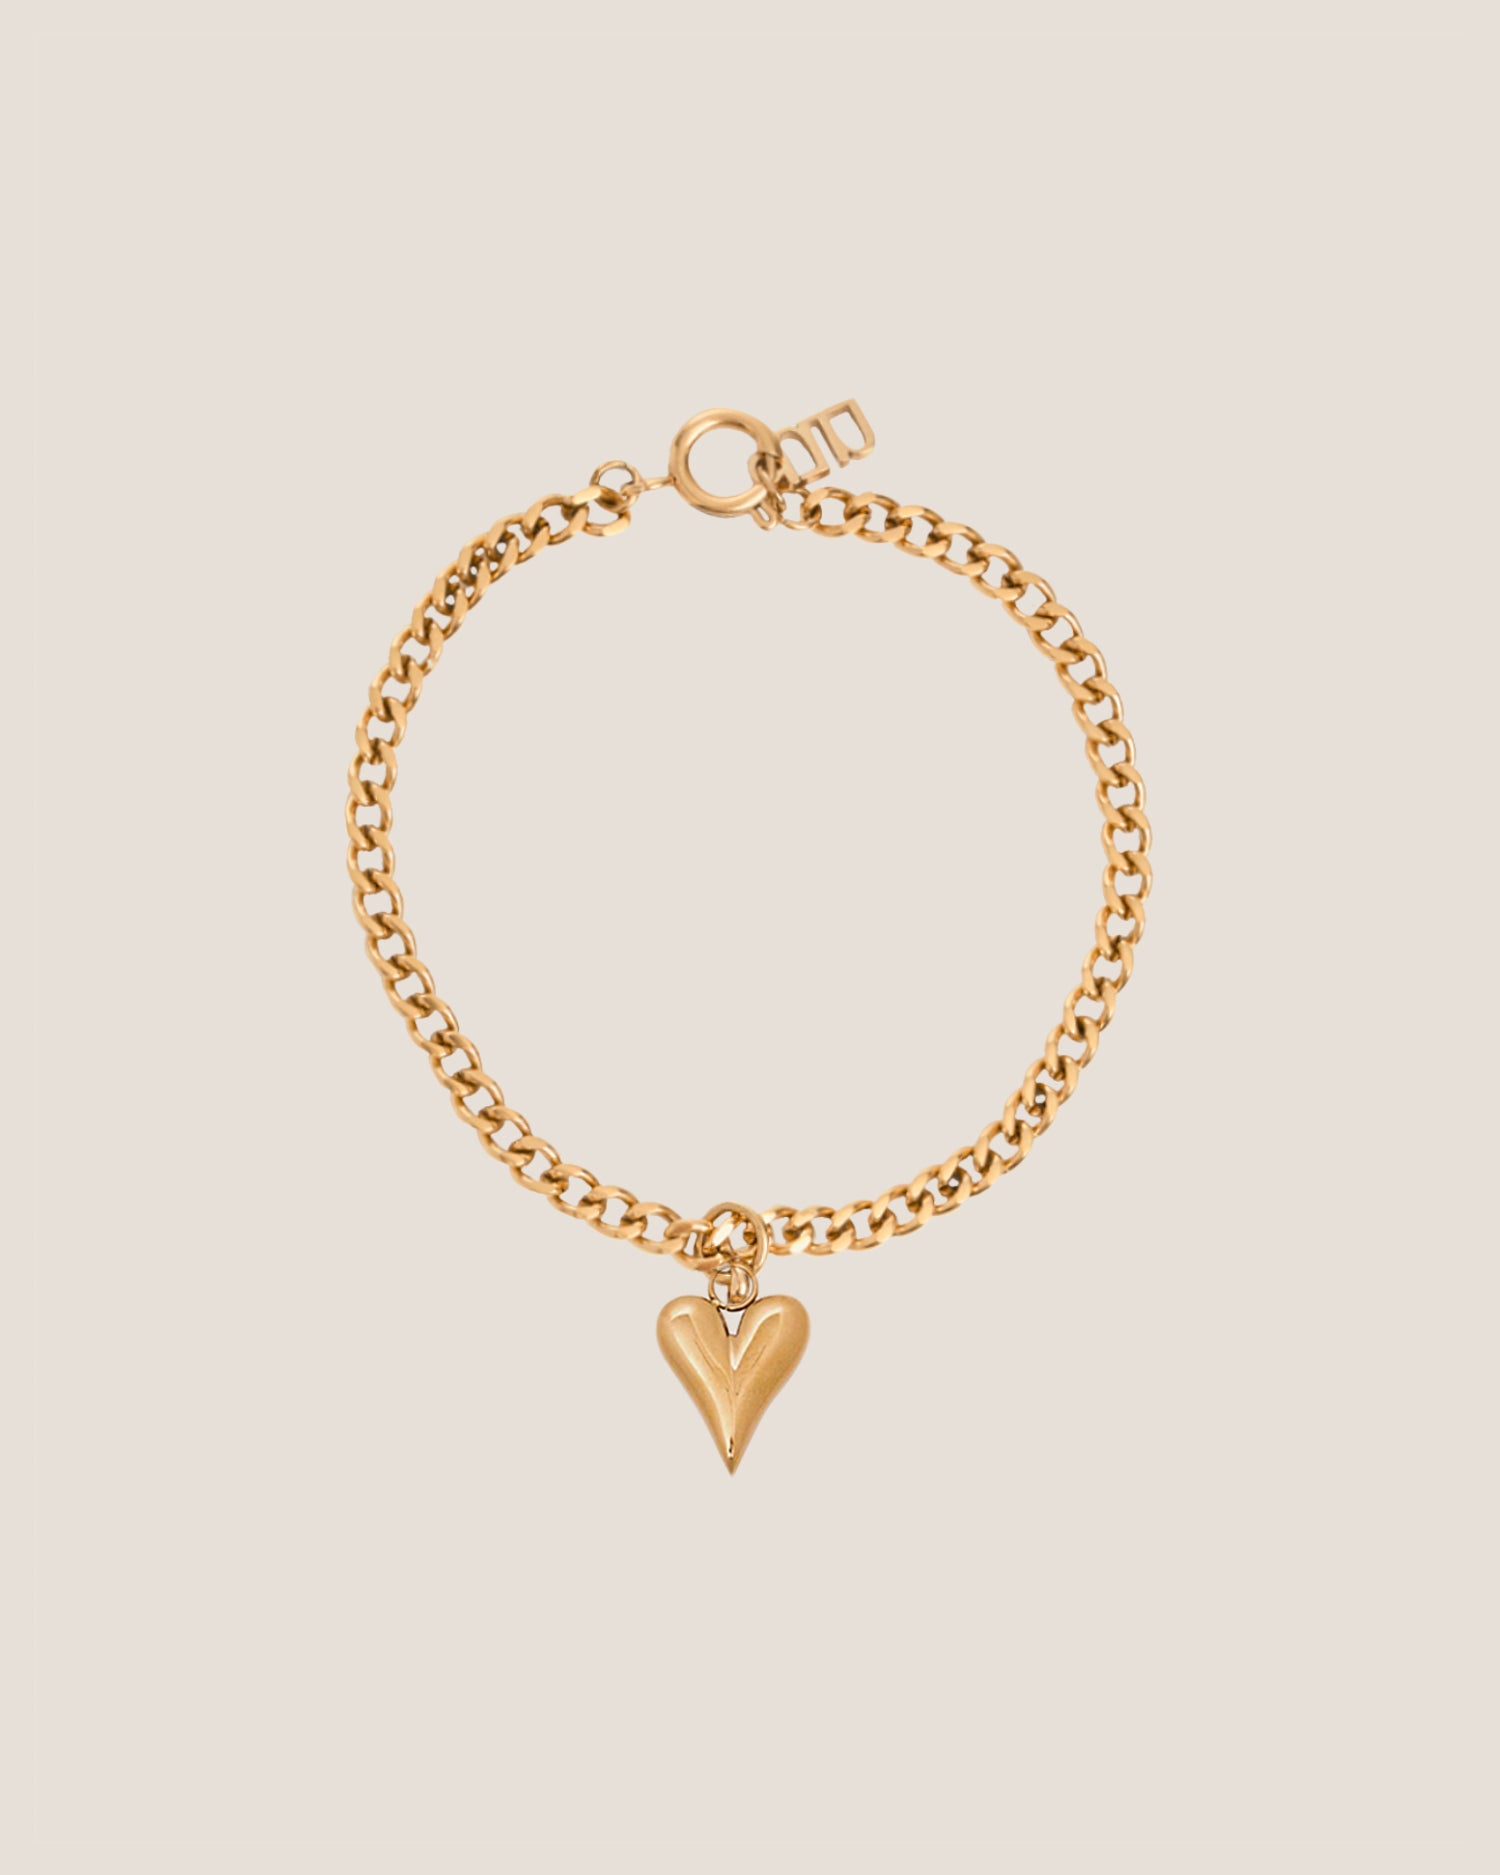 Curb Chain Gold Bracelet with Love Pendant